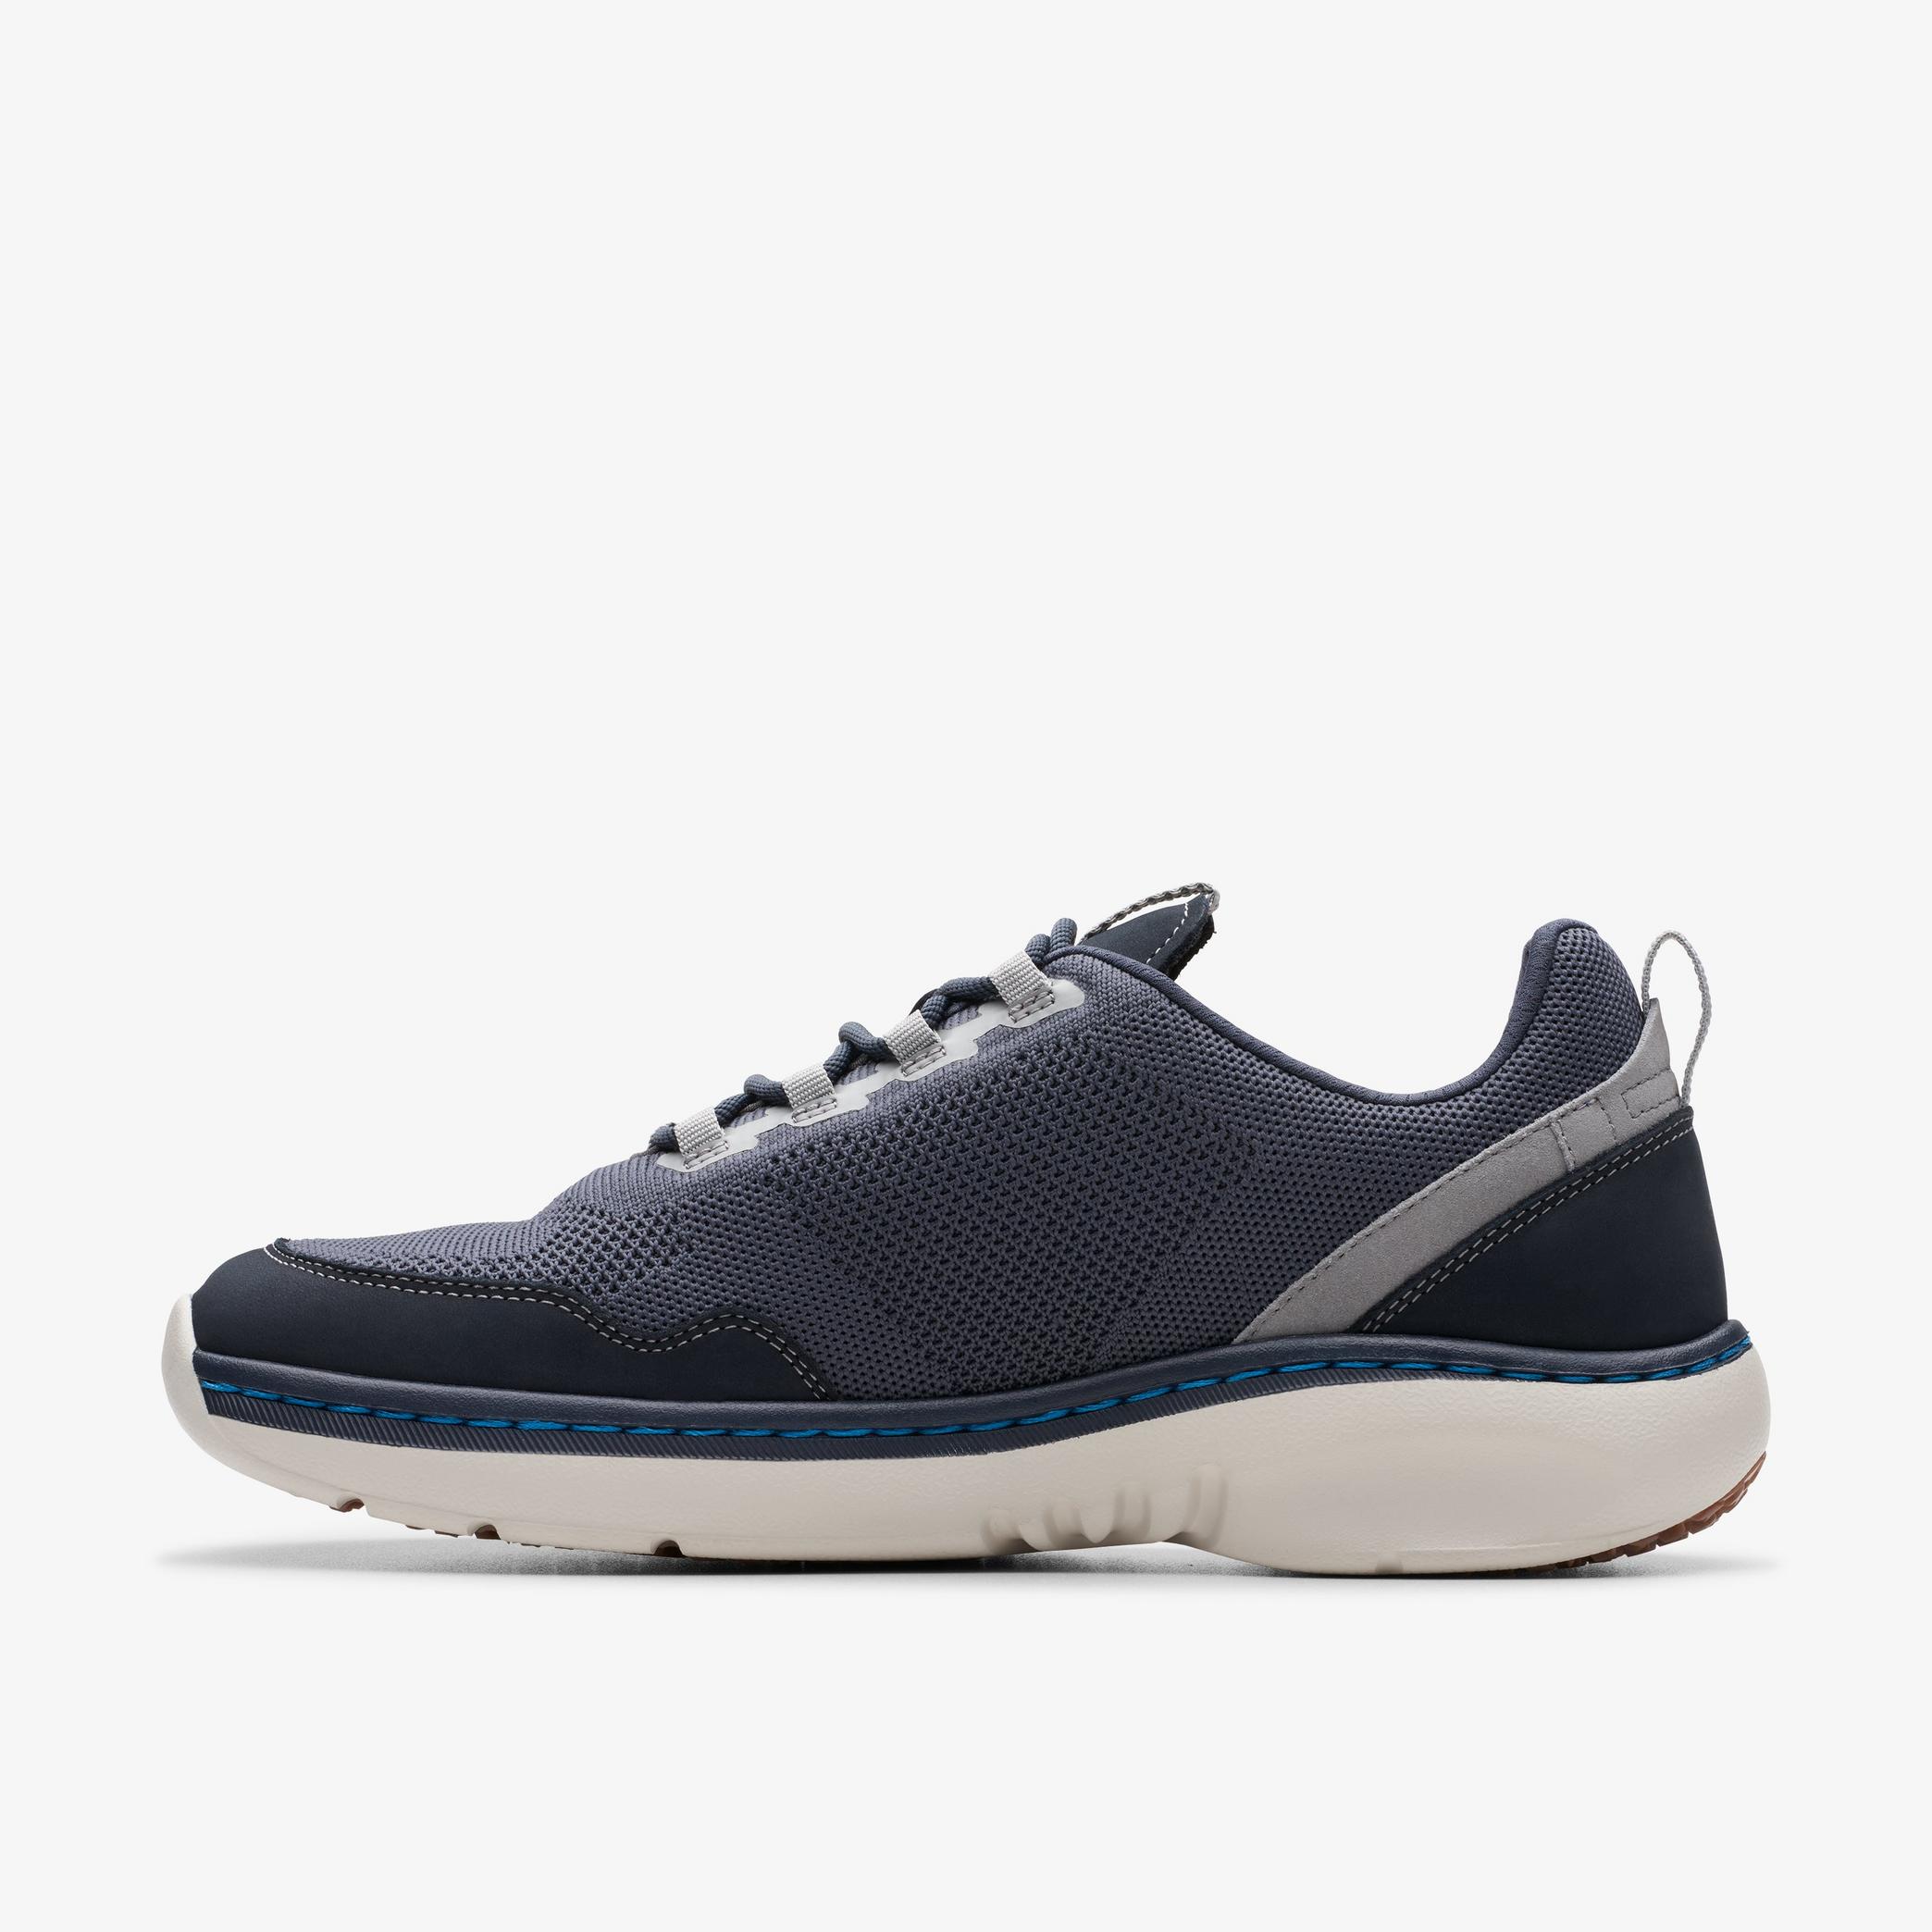 Clarks Pro Knit Navy Combination Trainers, view 2 of 6